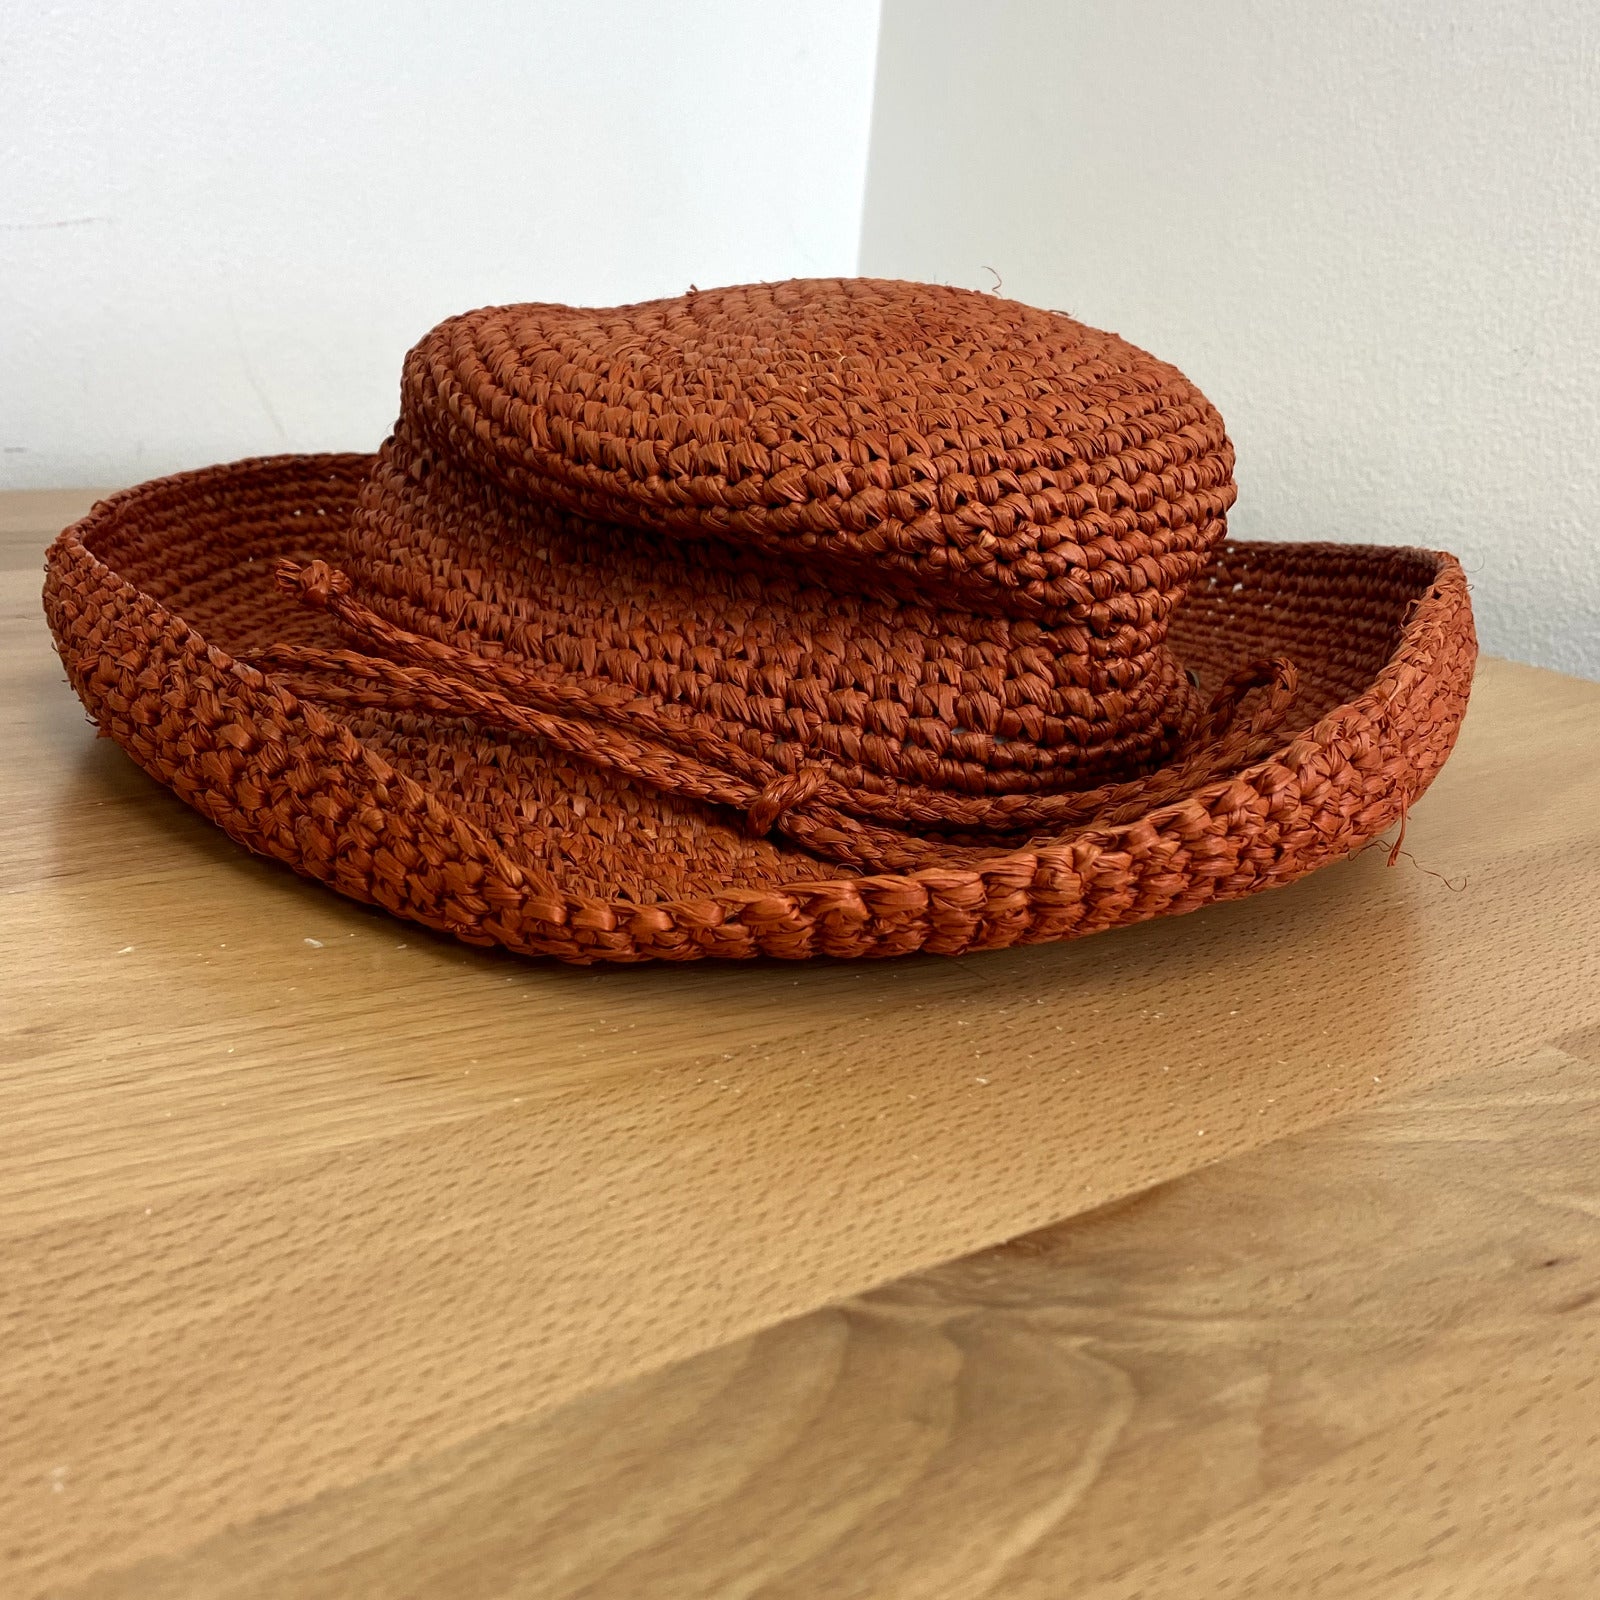 Scala Collection Orange Natural Fiber Woven Beach Straw Hat One Size Fit All